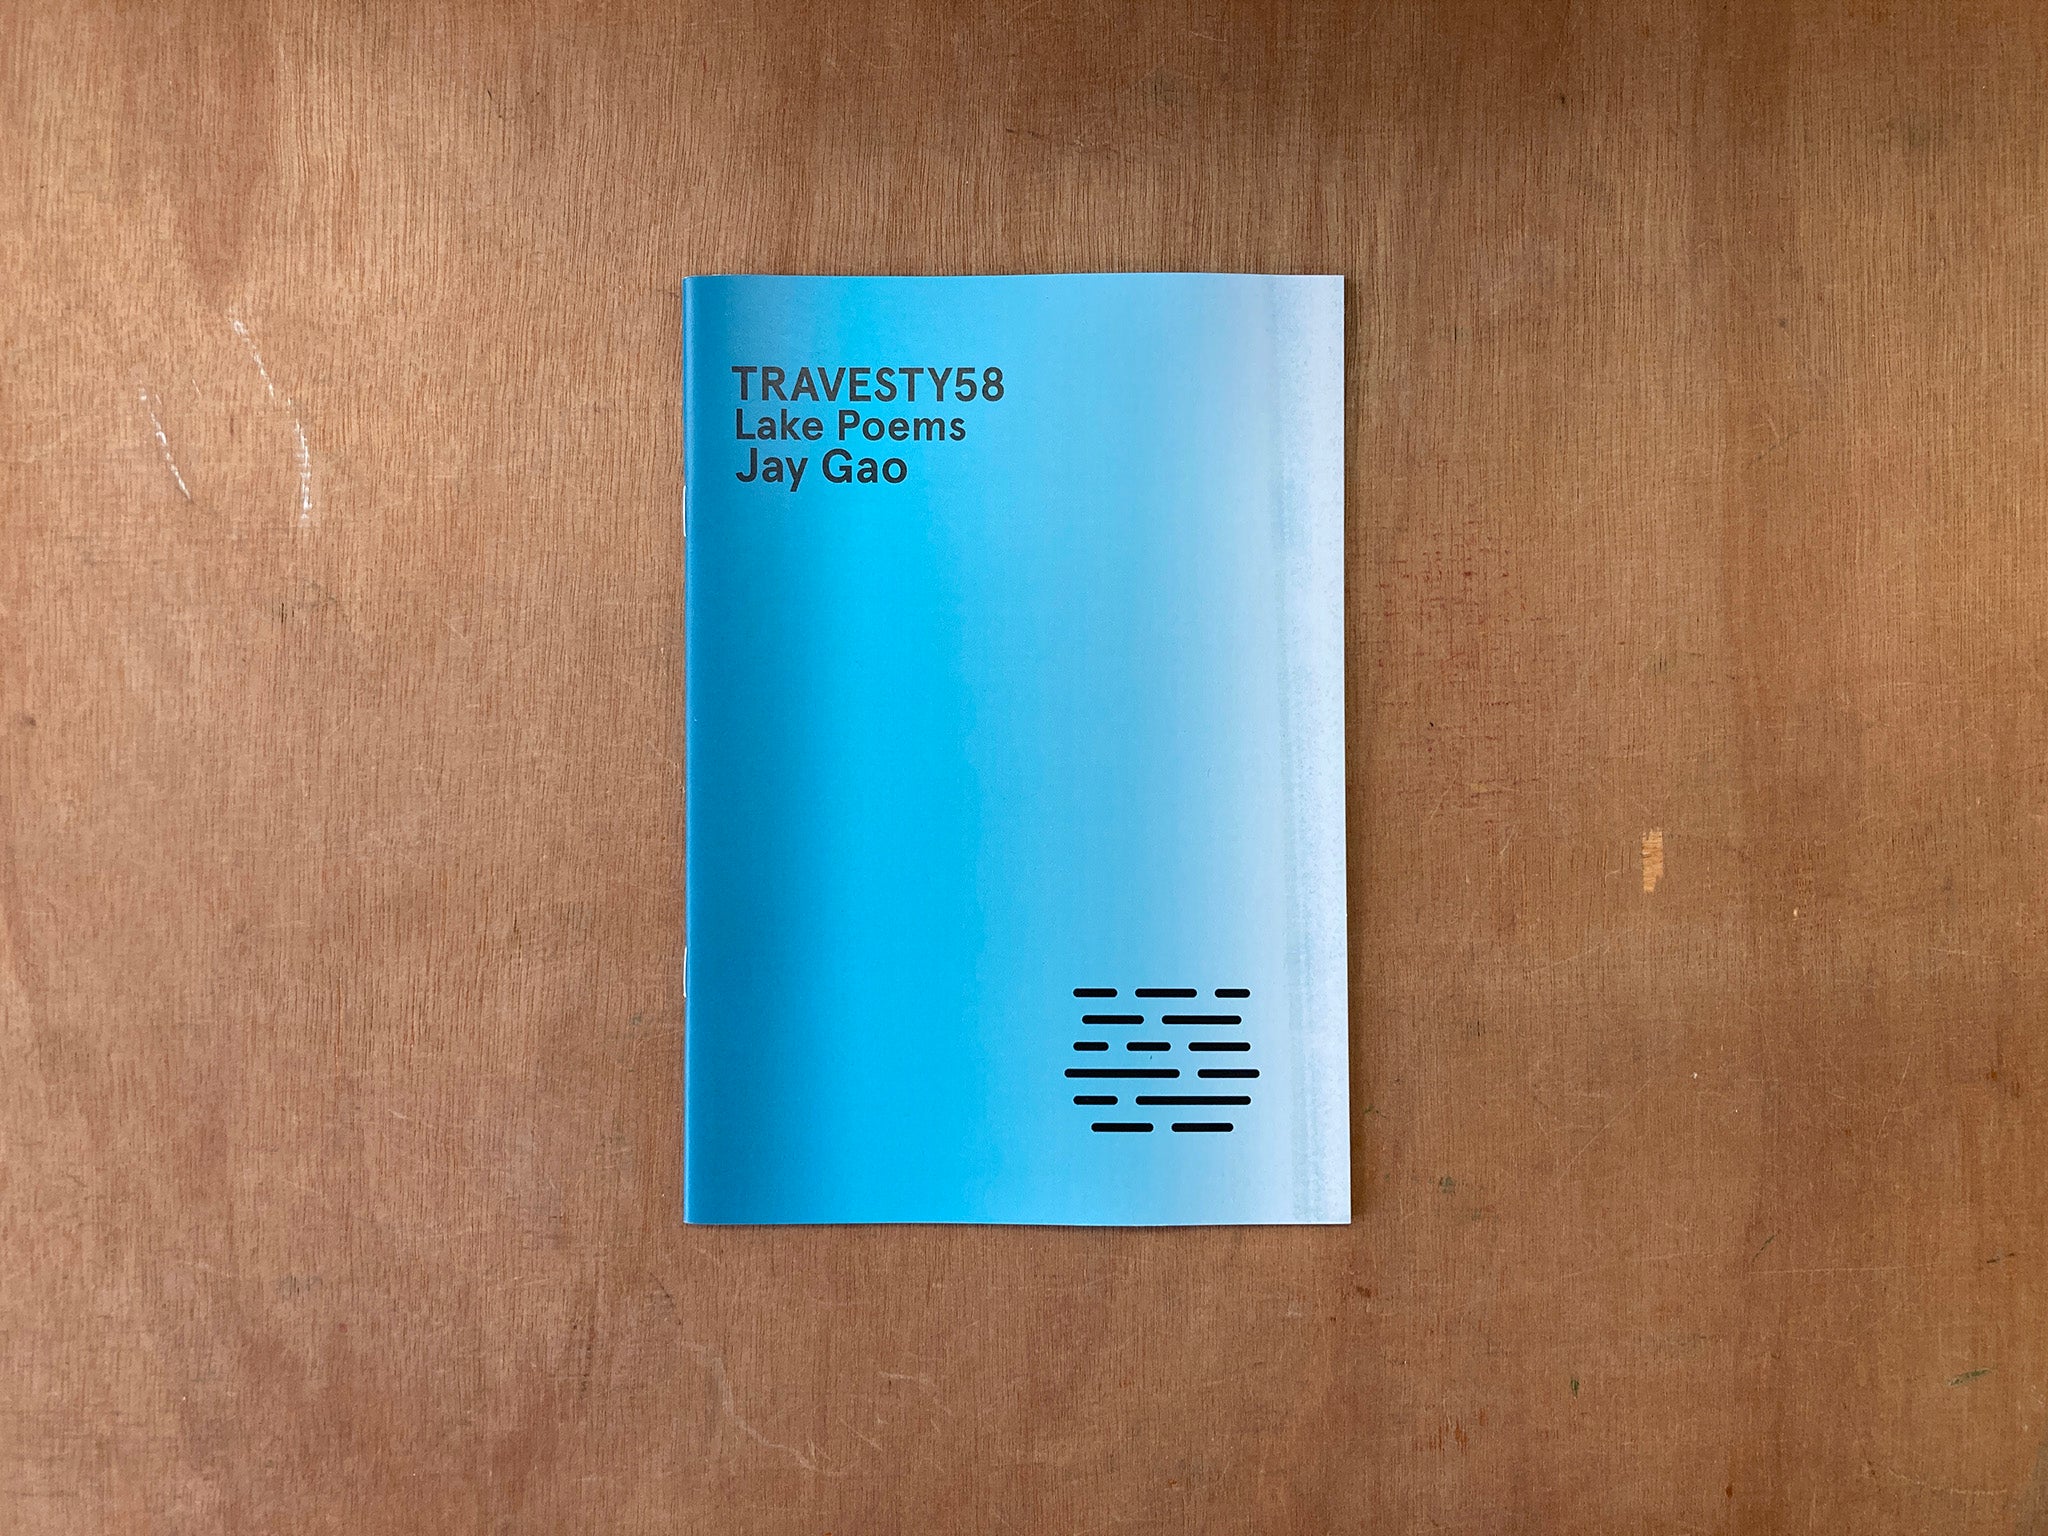 TRAVESTY58: LAKE POEMS by Jay Gao